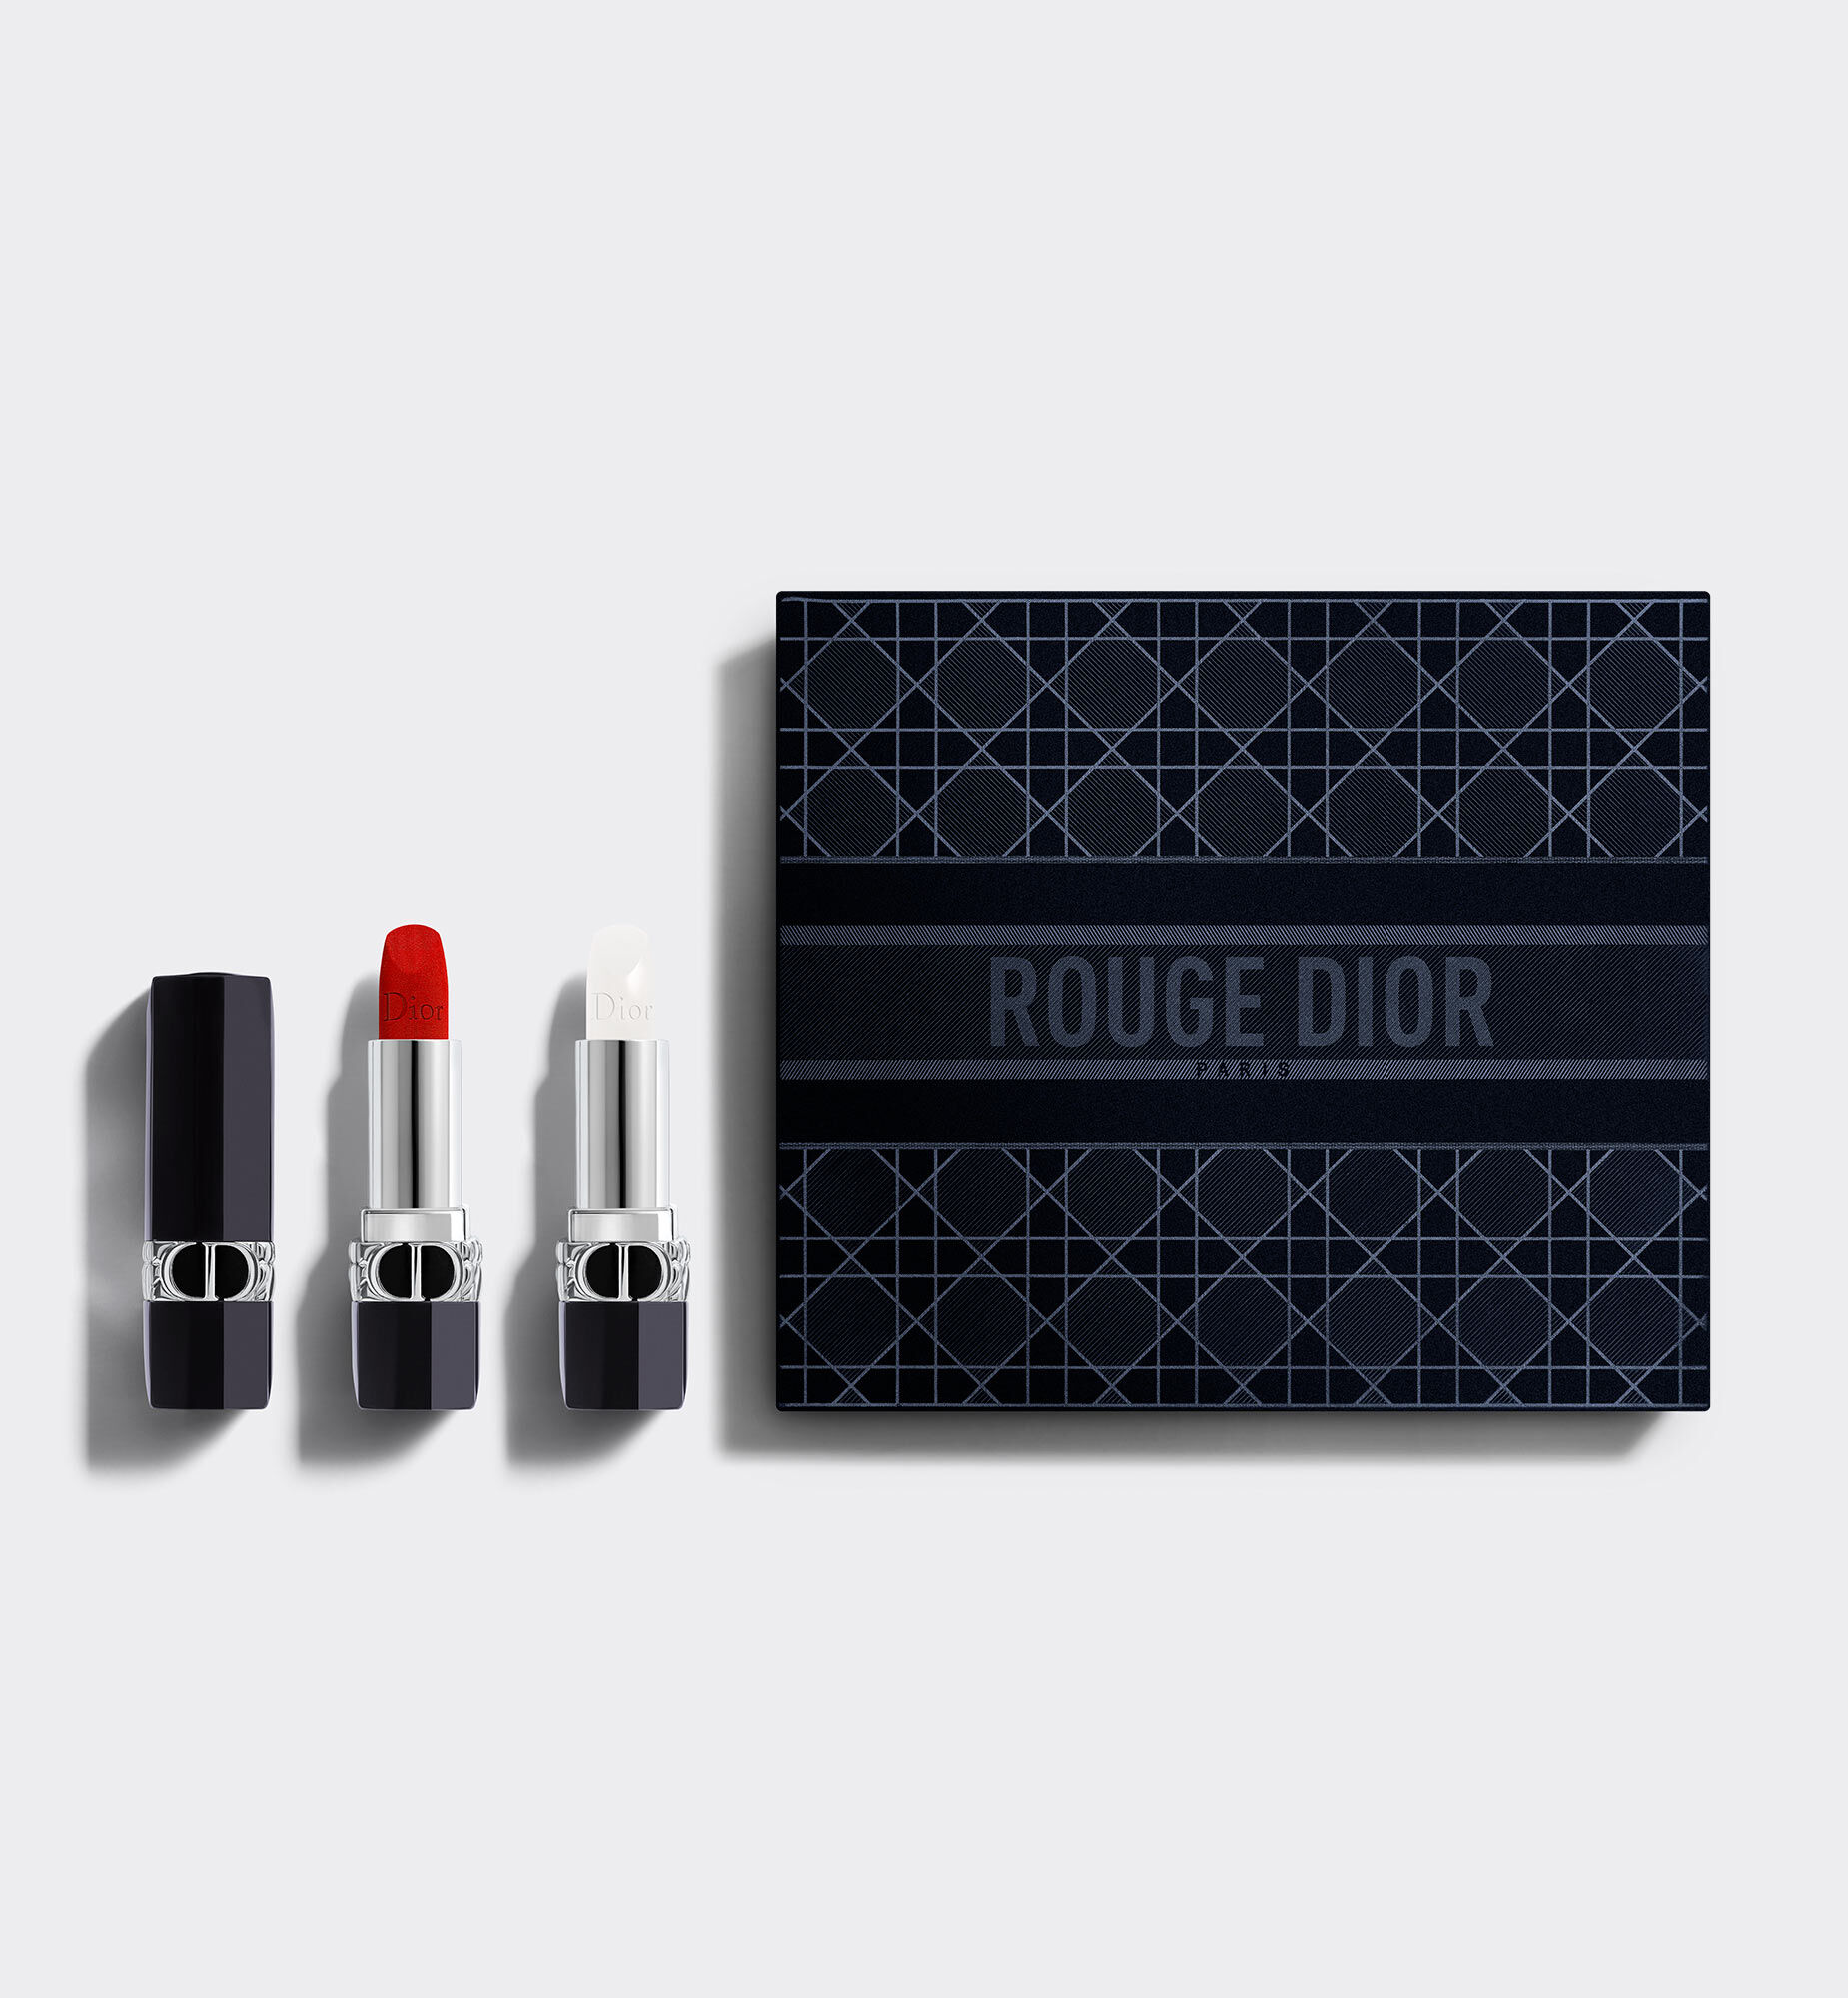 DIOR Beauty Gifts  Sets  Nordstrom